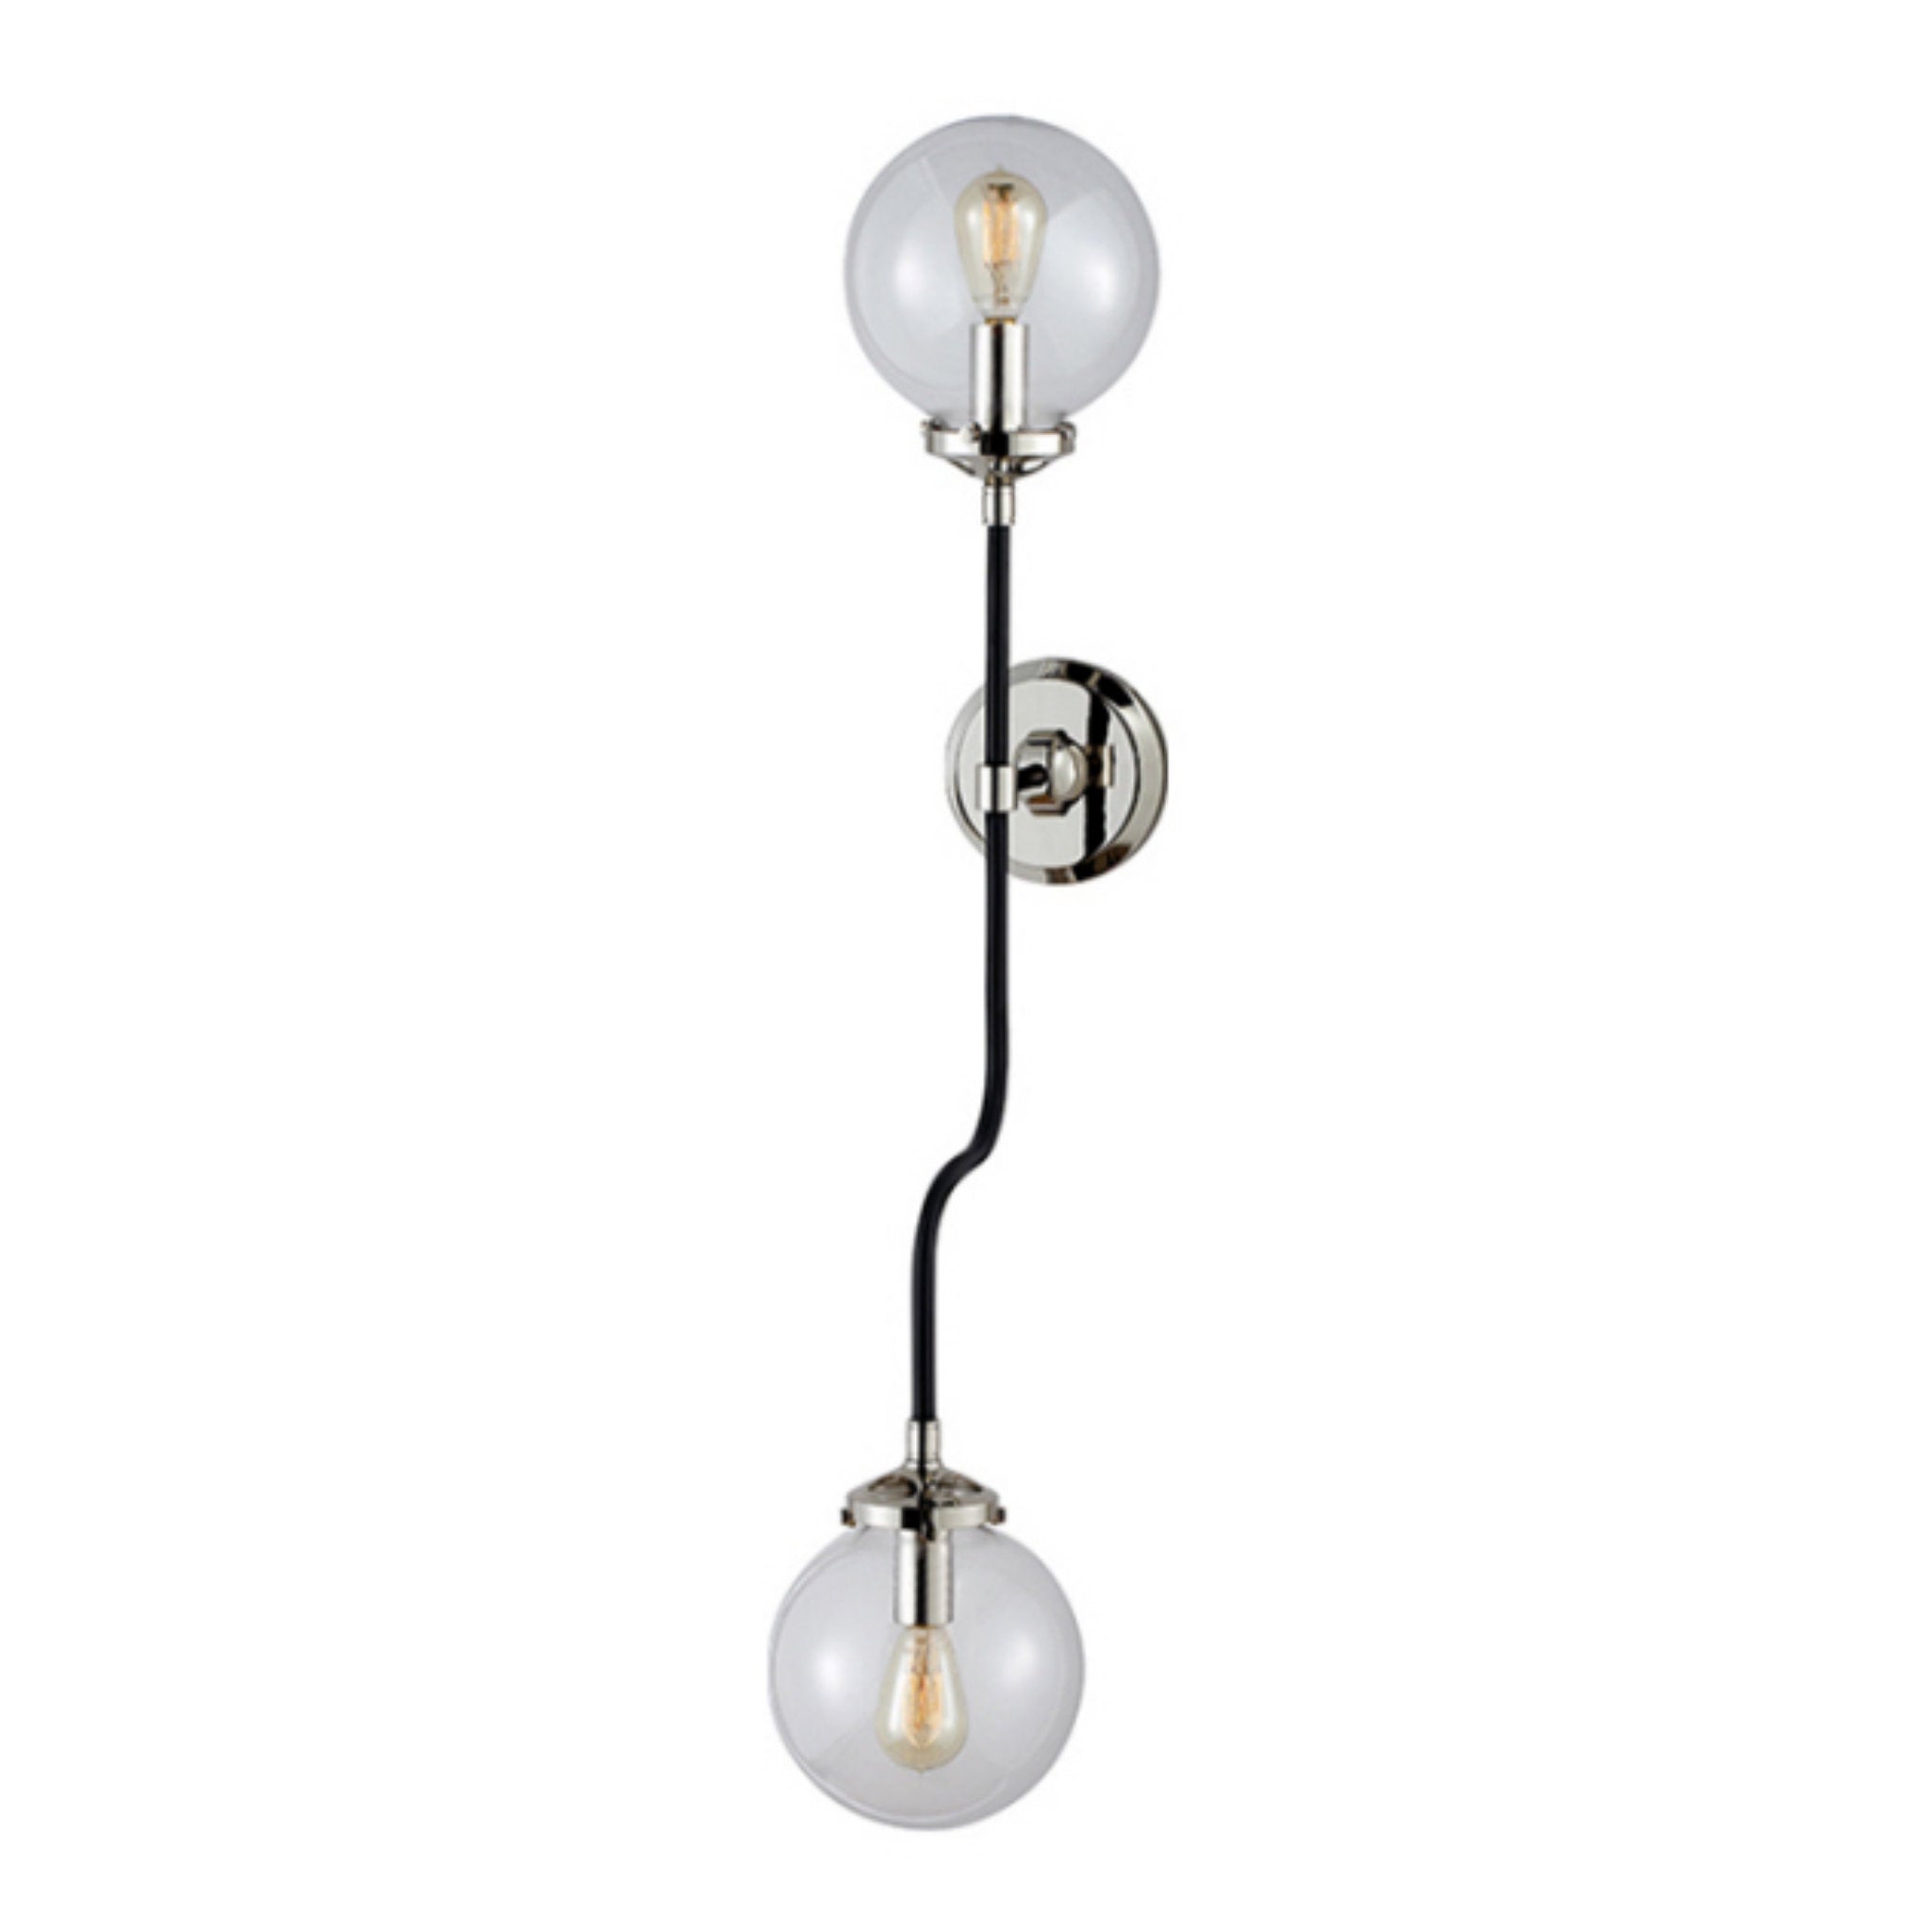 Ian K. Fowler Bistro Double Wall Sconce in Polished Nickel with Clear Glass